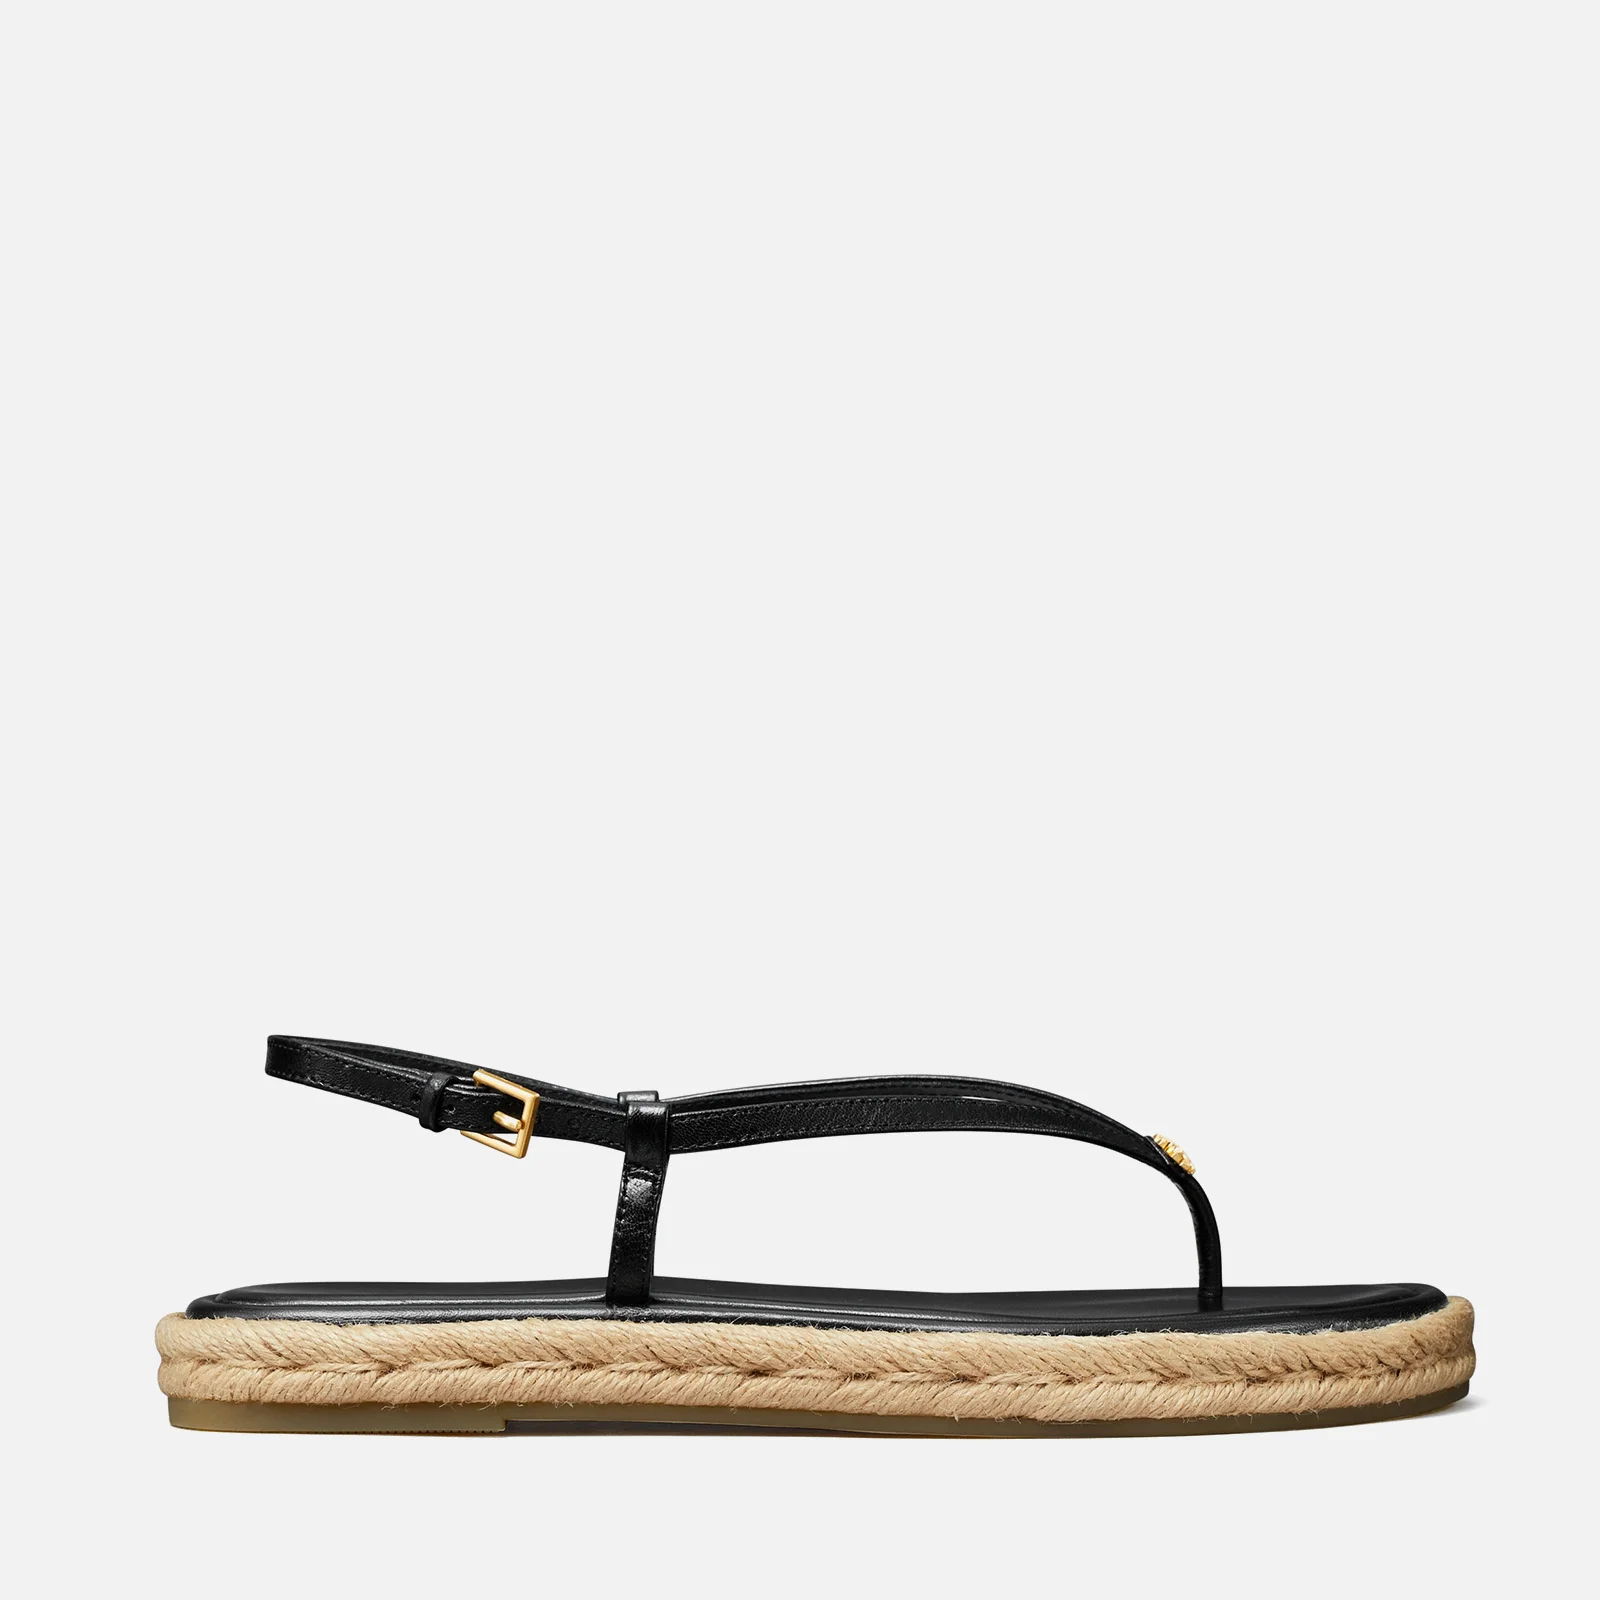 Tory Burch Women's Leather Espadrille Sandals Image 1